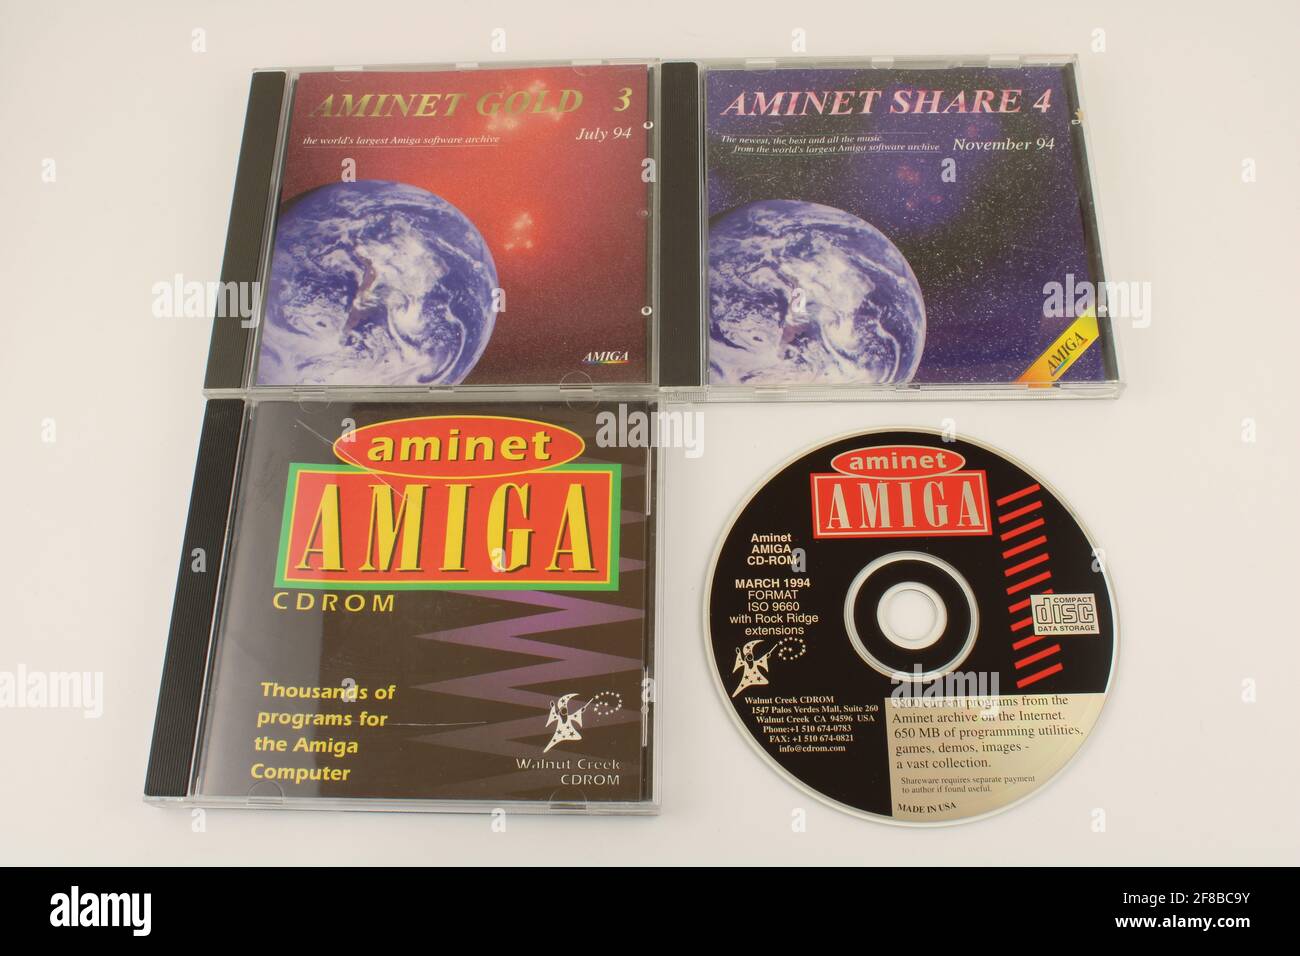 Amiga software CDs in cd cases by Aminet. Old Amiga gaming concept Stock Photo